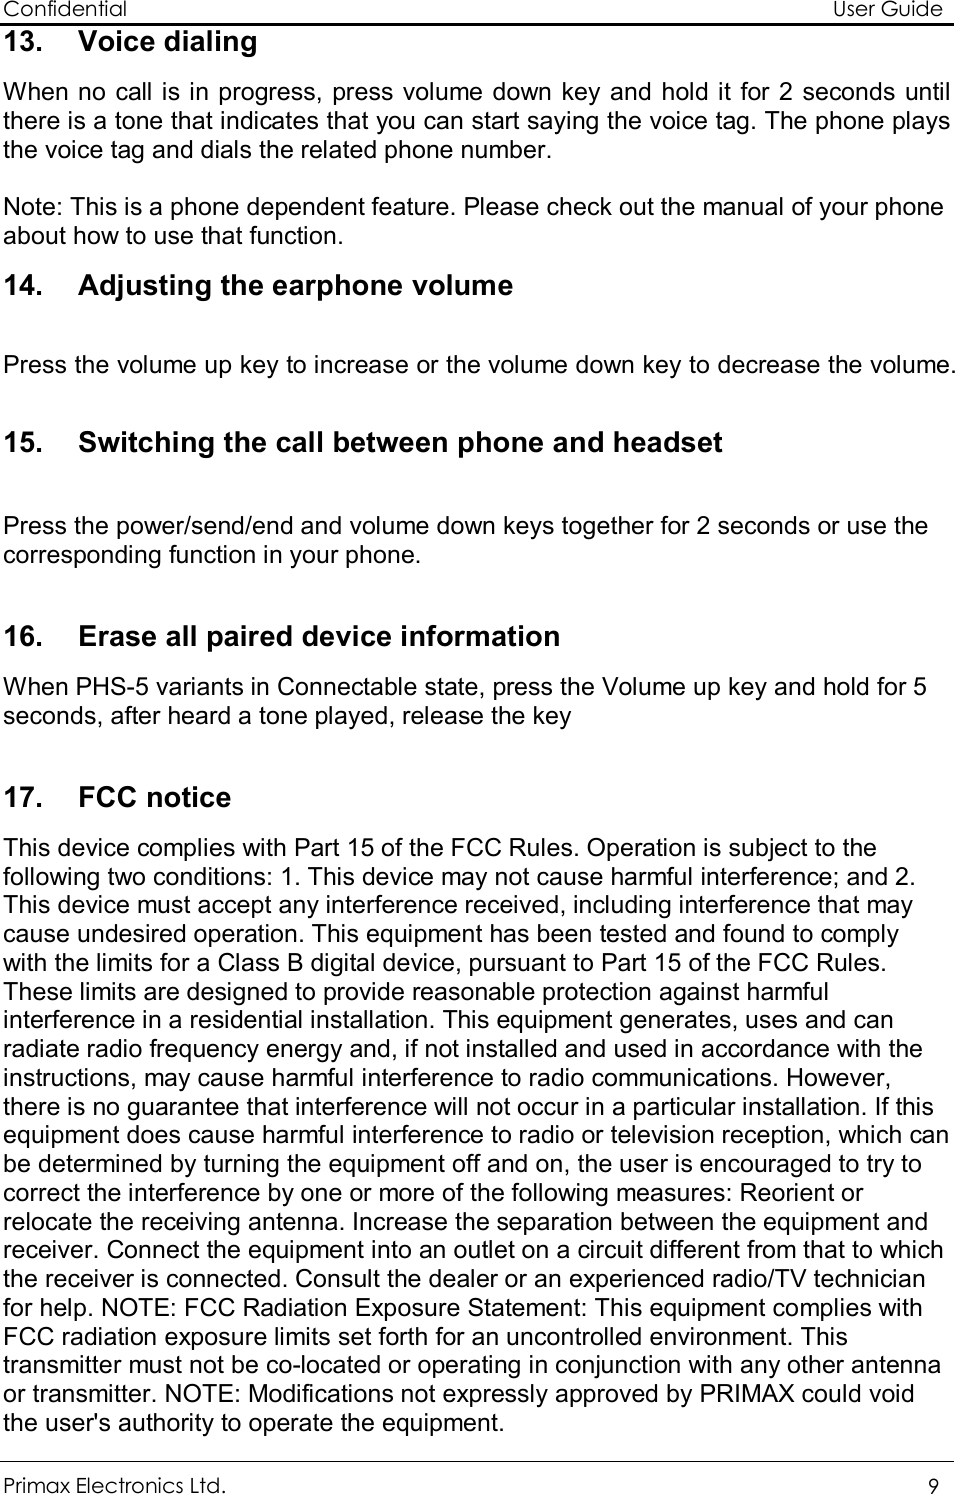 Confidential                                                                                                          User Guide Primax Electronics Ltd.  9 13. Voice dialing  When no call is in progress, press volume down key and hold it for 2 seconds until there is a tone that indicates that you can start saying the voice tag. The phone plays the voice tag and dials the related phone number.   Note: This is a phone dependent feature. Please check out the manual of your phone about how to use that function. 14. Adjusting the earphone volume  Press the volume up key to increase or the volume down key to decrease the volume.  15. Switching the call between phone and headset  Press the power/send/end and volume down keys together for 2 seconds or use the corresponding function in your phone.  16. Erase all paired device information When PHS-5 variants in Connectable state, press the Volume up key and hold for 5 seconds, after heard a tone played, release the key  17. FCC notice This device complies with Part 15 of the FCC Rules. Operation is subject to the following two conditions: 1. This device may not cause harmful interference; and 2. This device must accept any interference received, including interference that may cause undesired operation. This equipment has been tested and found to comply with the limits for a Class B digital device, pursuant to Part 15 of the FCC Rules. These limits are designed to provide reasonable protection against harmful interference in a residential installation. This equipment generates, uses and can radiate radio frequency energy and, if not installed and used in accordance with the instructions, may cause harmful interference to radio communications. However, there is no guarantee that interference will not occur in a particular installation. If this equipment does cause harmful interference to radio or television reception, which can be determined by turning the equipment off and on, the user is encouraged to try to correct the interference by one or more of the following measures: Reorient or relocate the receiving antenna. Increase the separation between the equipment and receiver. Connect the equipment into an outlet on a circuit different from that to which the receiver is connected. Consult the dealer or an experienced radio/TV technician for help. NOTE: FCC Radiation Exposure Statement: This equipment complies with FCC radiation exposure limits set forth for an uncontrolled environment. This transmitter must not be co-located or operating in conjunction with any other antenna or transmitter. NOTE: Modifications not expressly approved by PRIMAX could void the user&apos;s authority to operate the equipment. 